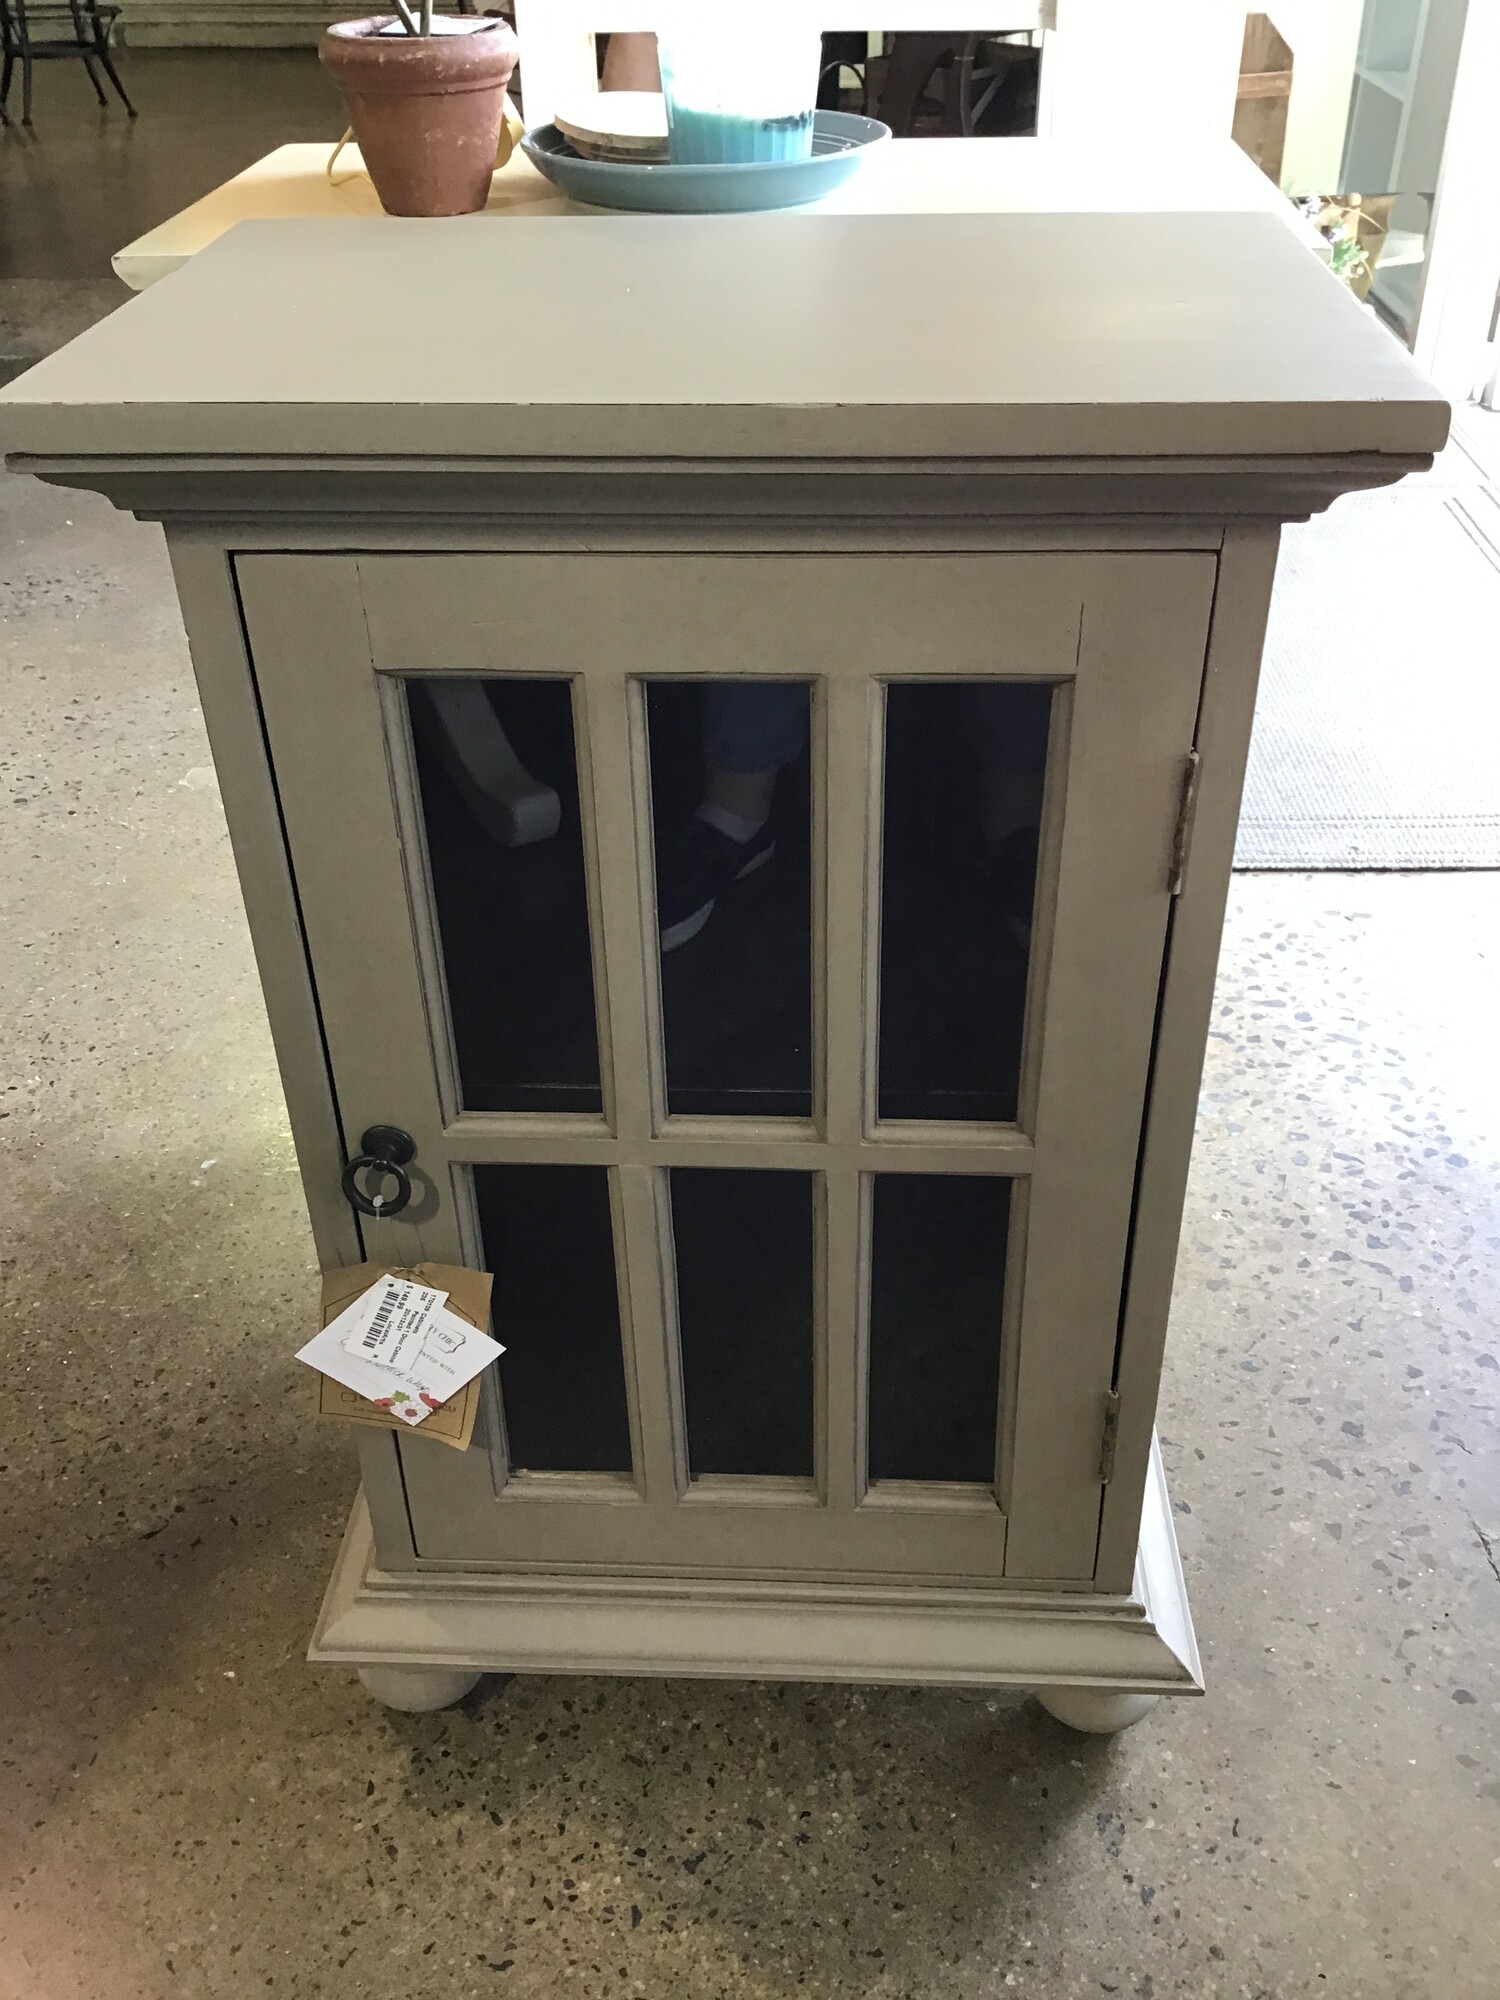 This super neutral cabinet was painted by one of our local artists using Country Chic Driftwood paint and a combination of clear and dark wax. It features a glass door and lower shelf.
Dimensions are 20 in x 13 in x 31 in